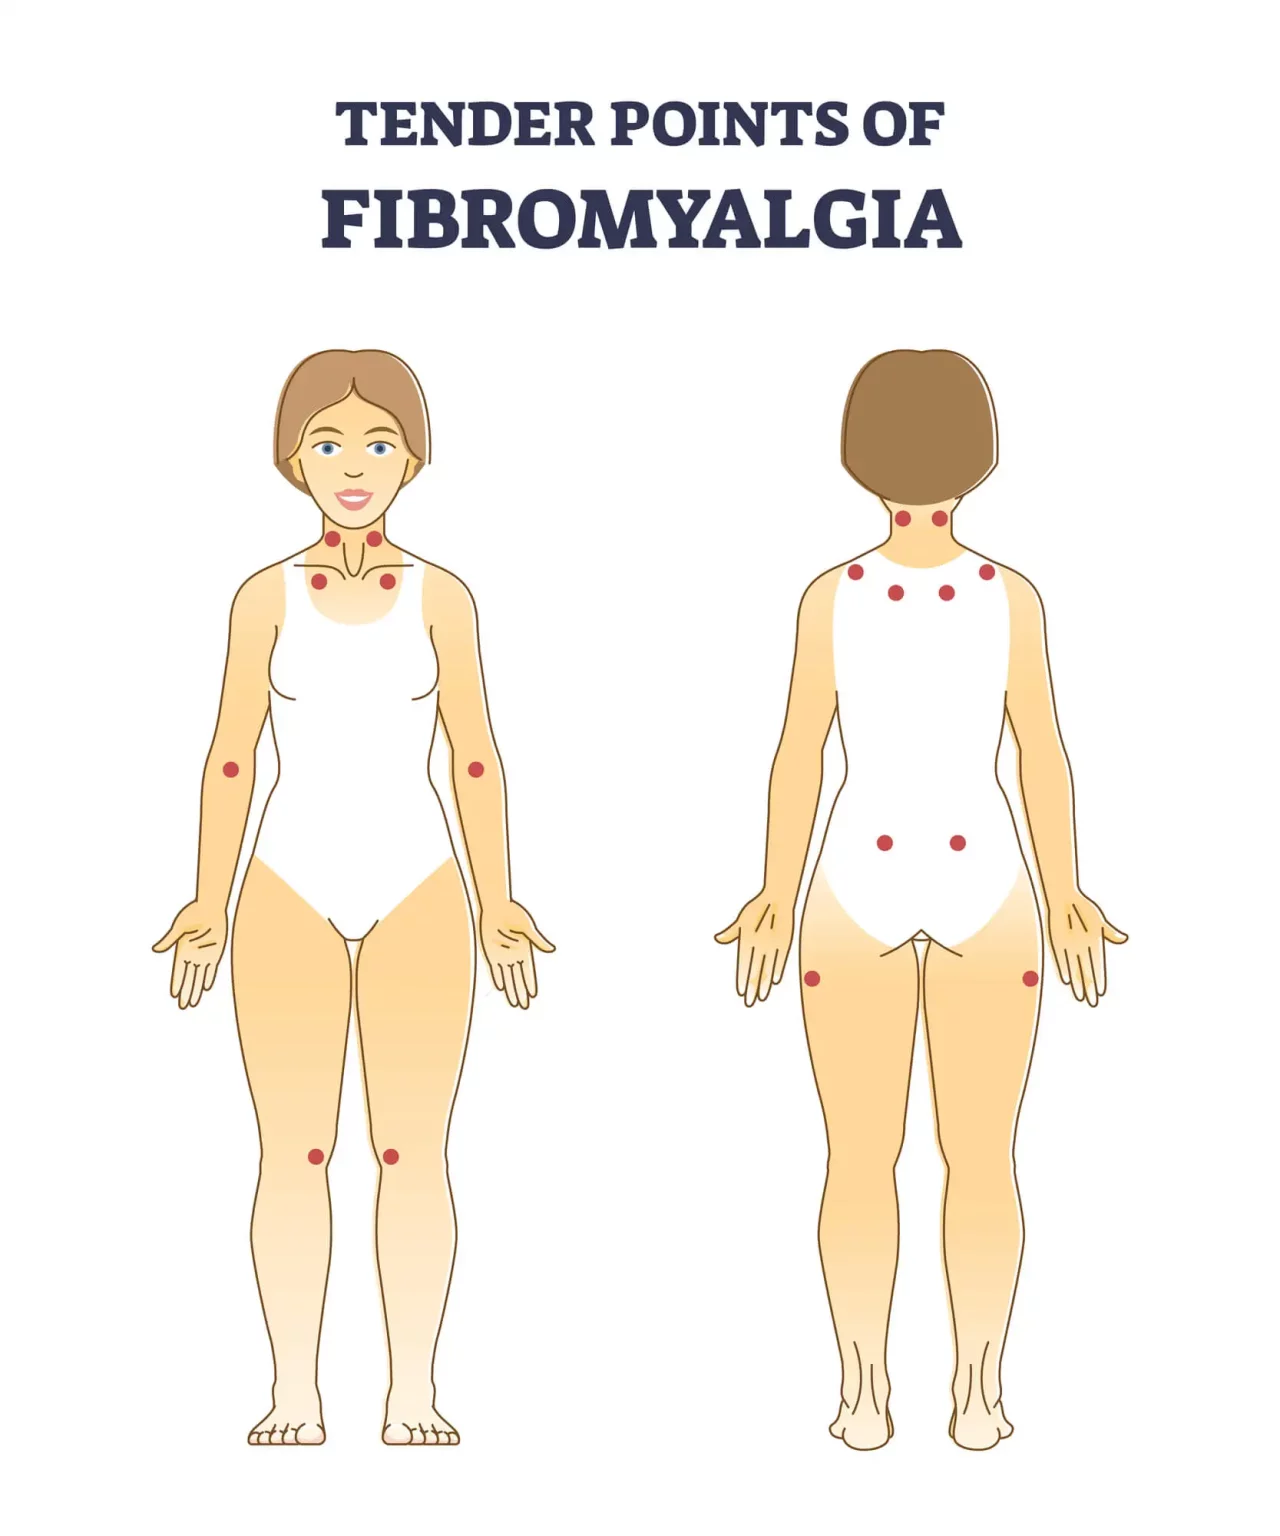 tender points, also called trigger points, of Fibromyalgia 